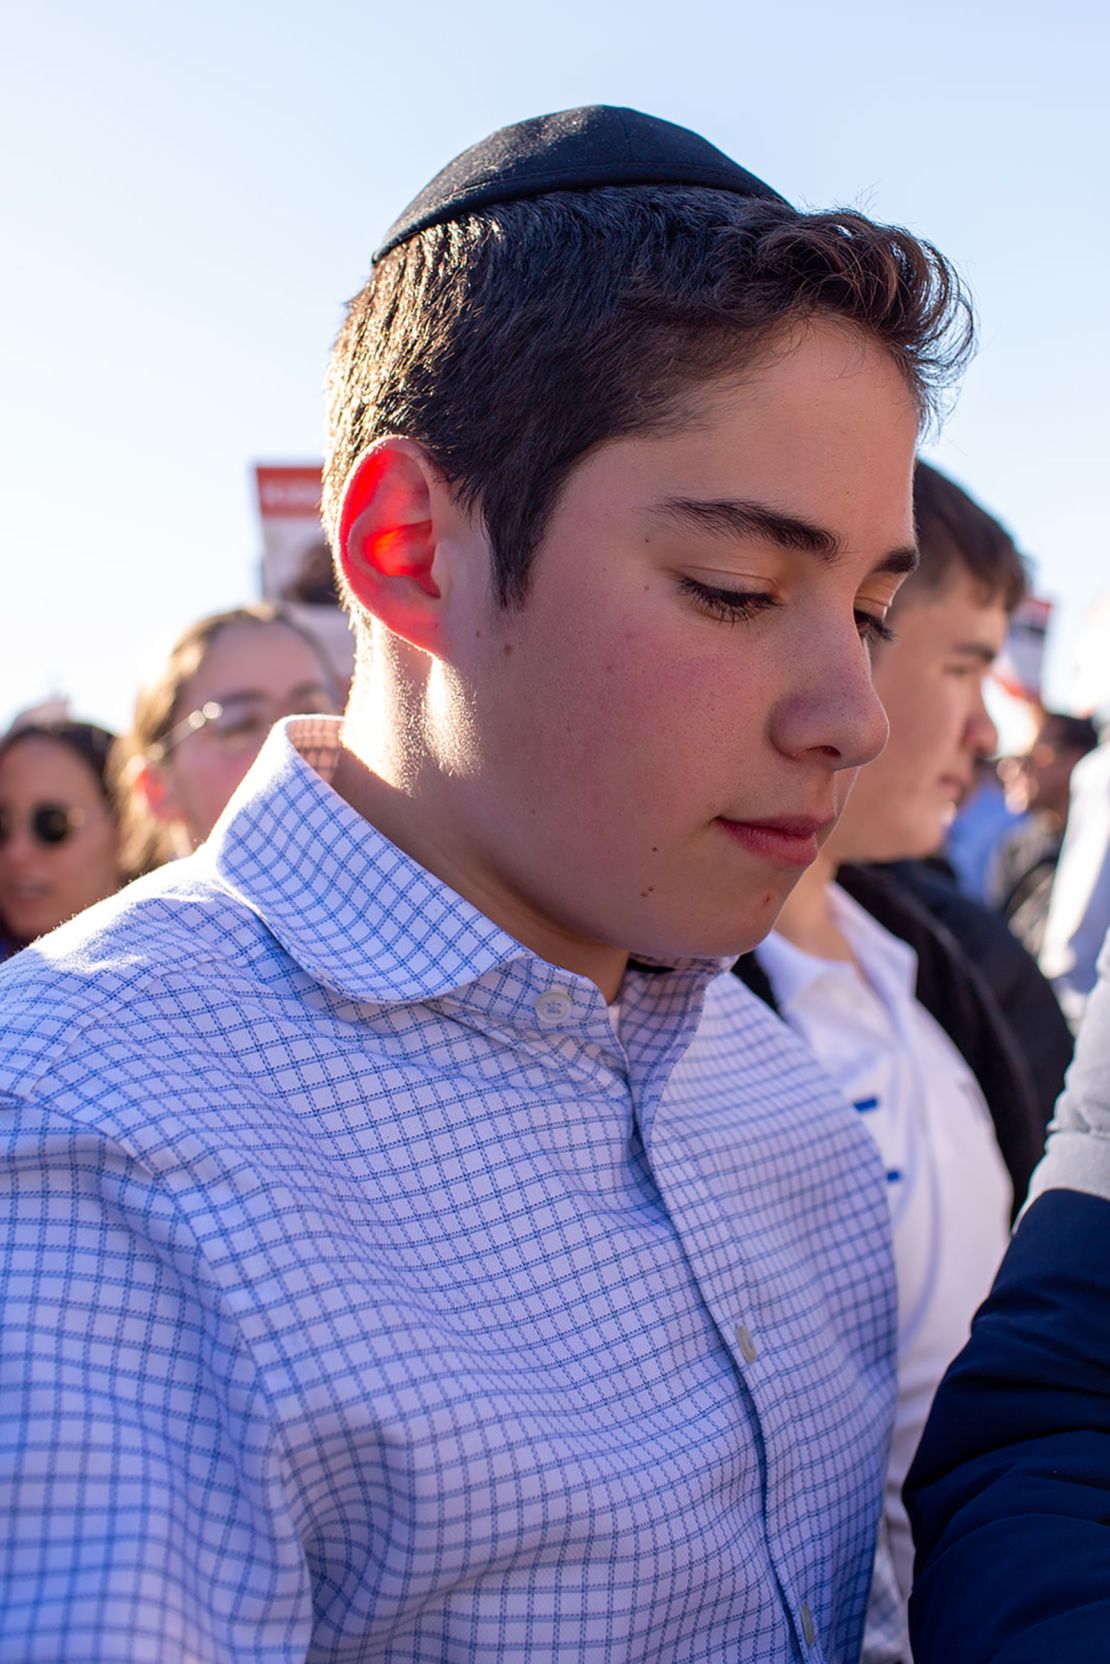 Ami Forman, 15, of New Jersey, went to Tuesday's March for Israel with his high school.